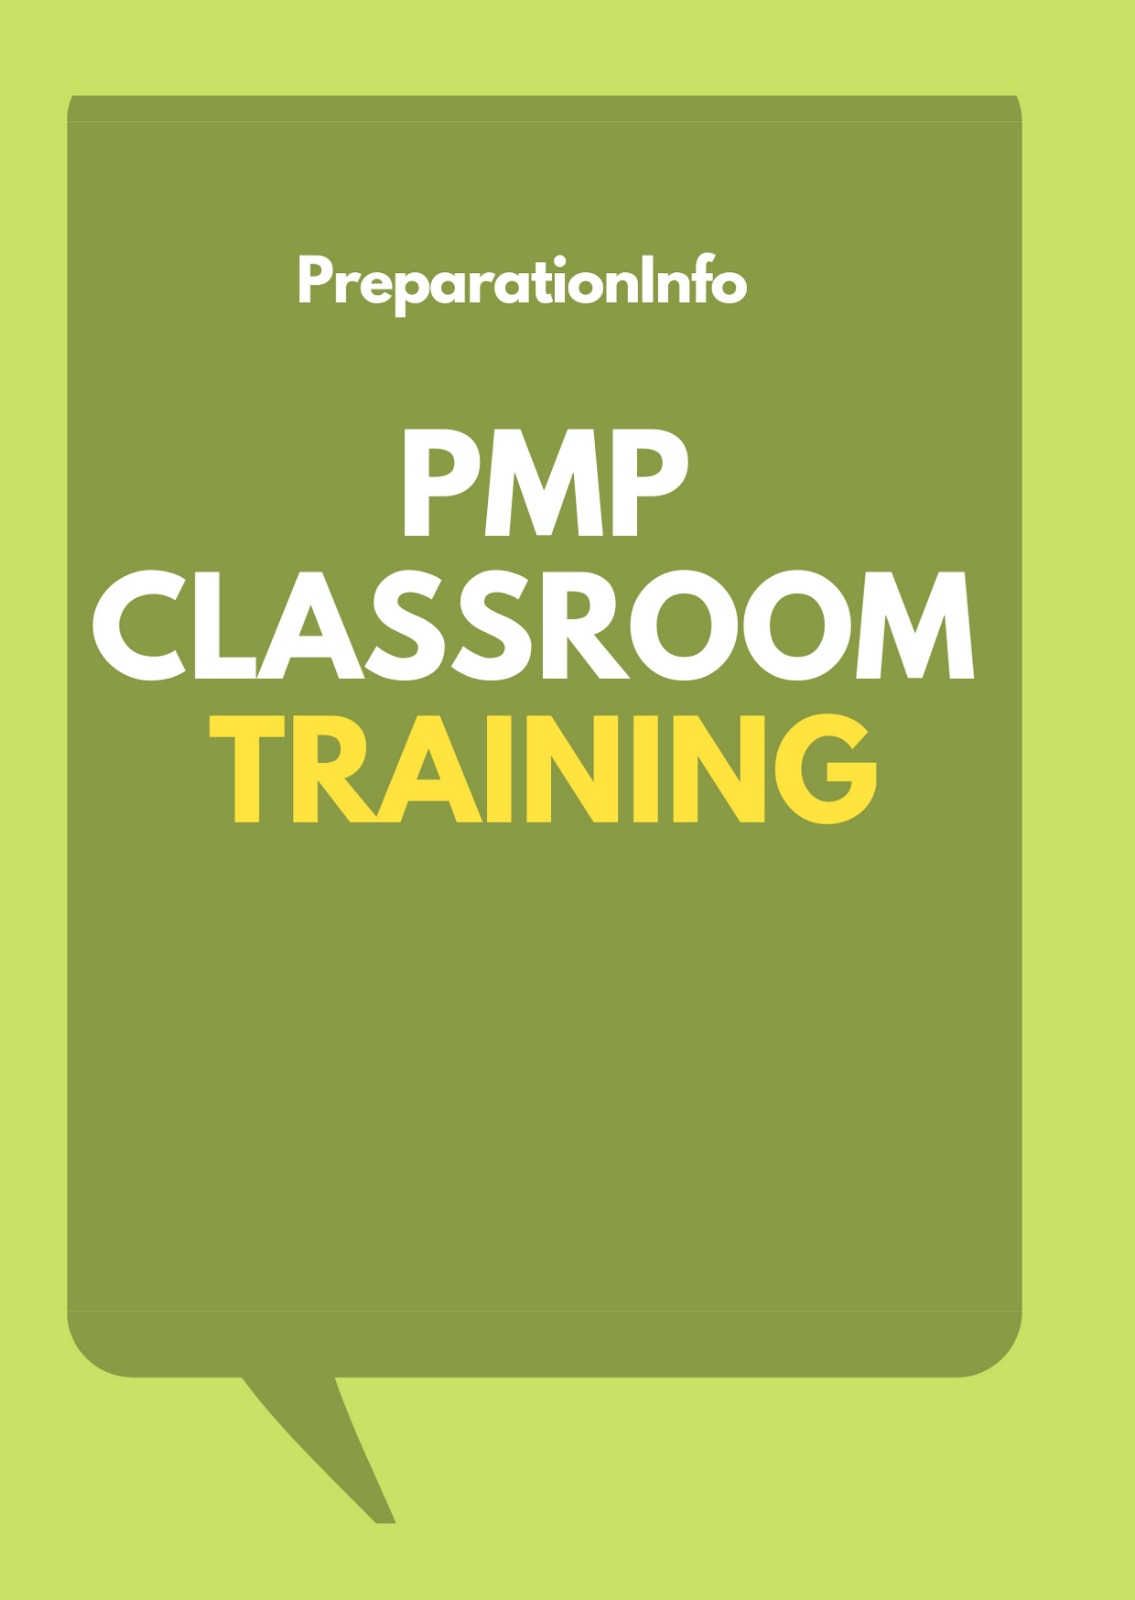 PMP Exam and Certification Classroom Training in Dar es Salaam Tanzania, Dar es Salaam, Dar-es-salaam, Tanzania